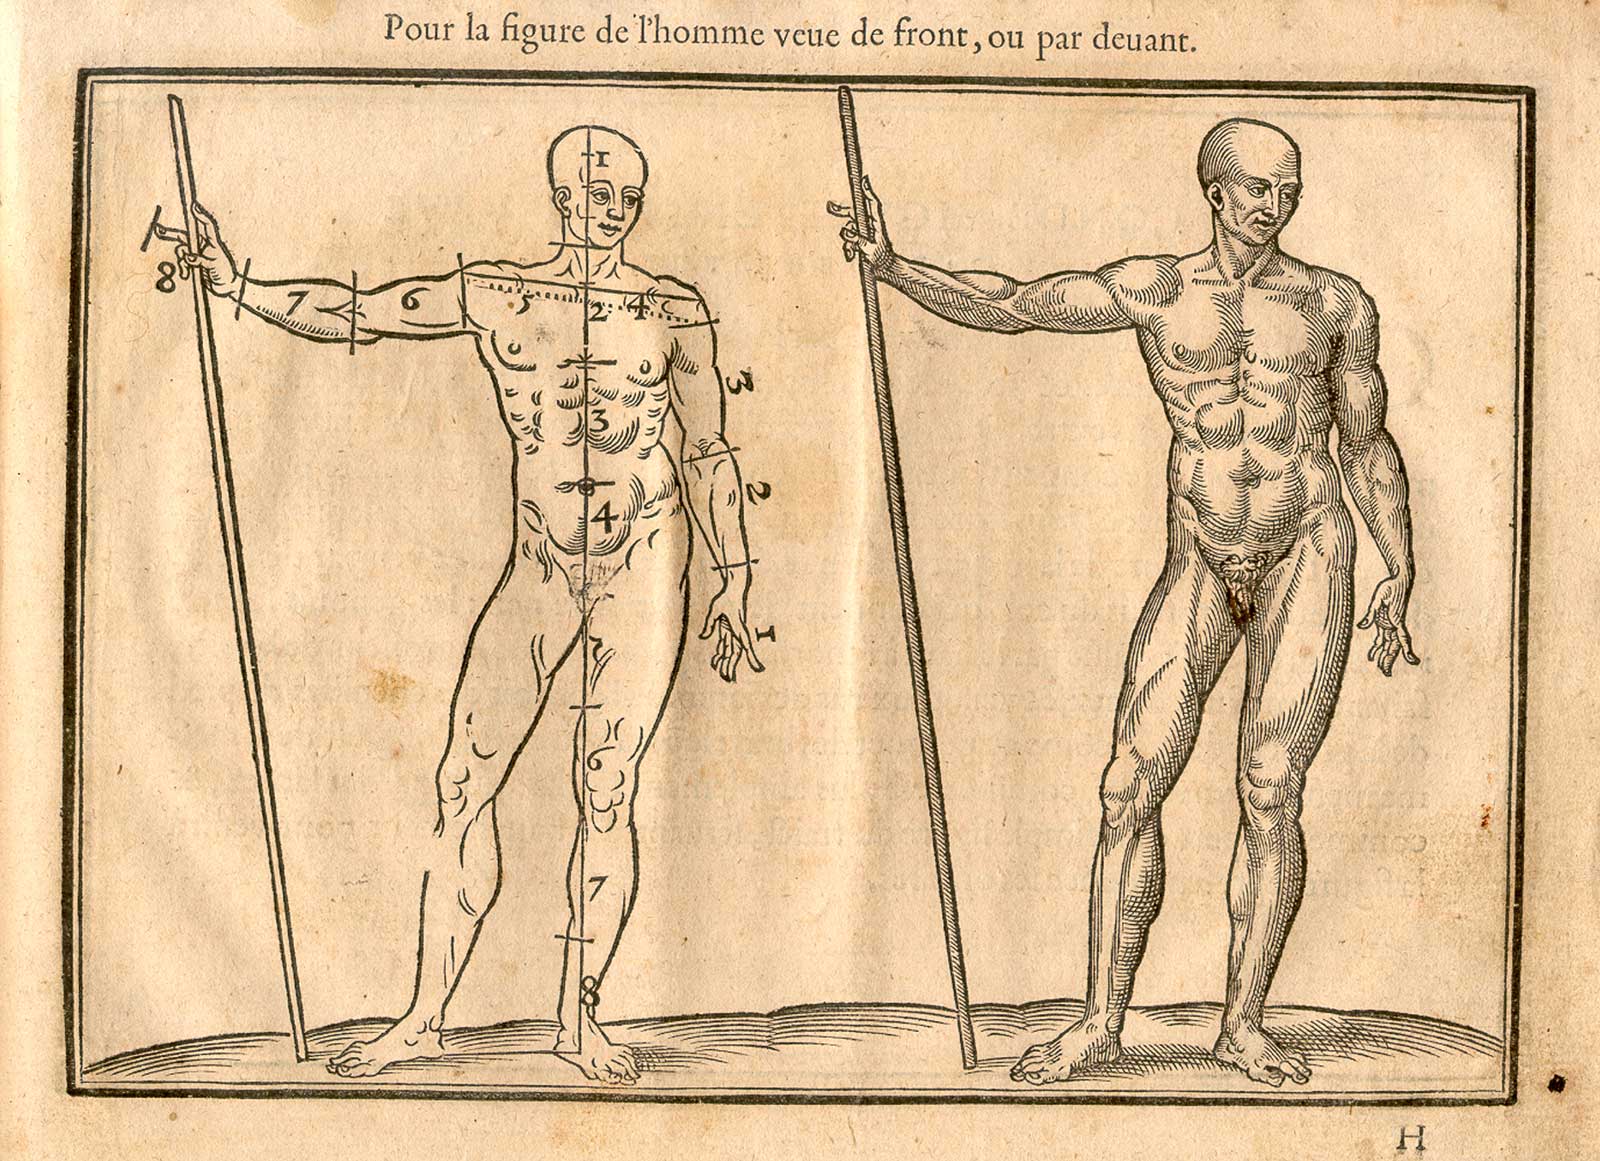 Woodcut illustration of two nude male anatomical figures viewed from the front, both images in identical poses facing to the right holding a staff in his right hand, with the left hand image showing the proportions of the figure measured out, from Jehan Cousin’s Livre de pourtraiture, NLM Call no.: WZ 250 C8673L 1608.